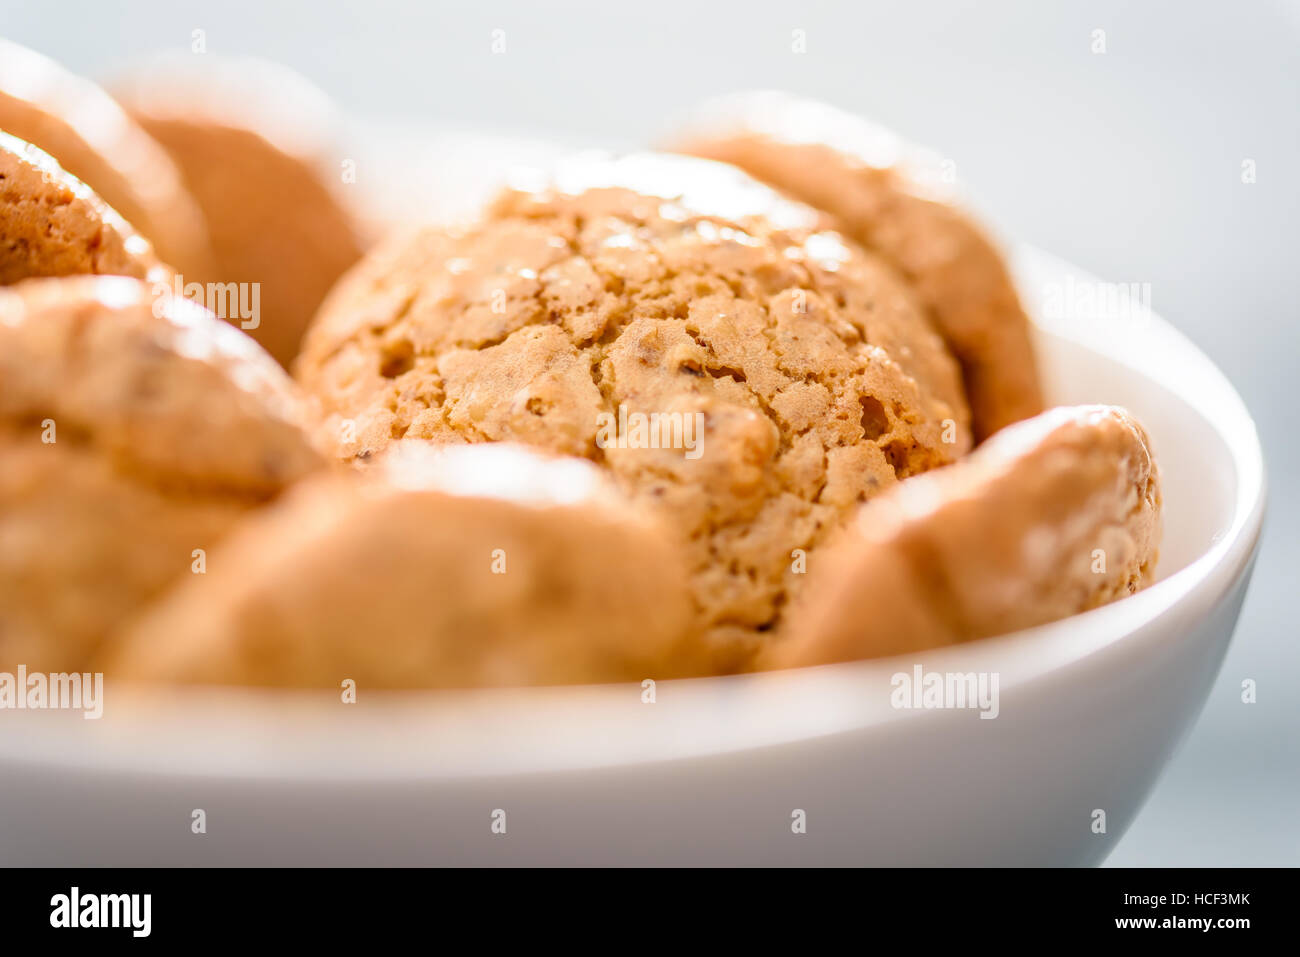 stock images and Crunchy photography hi-res Alamy - amaretti 3 Page -